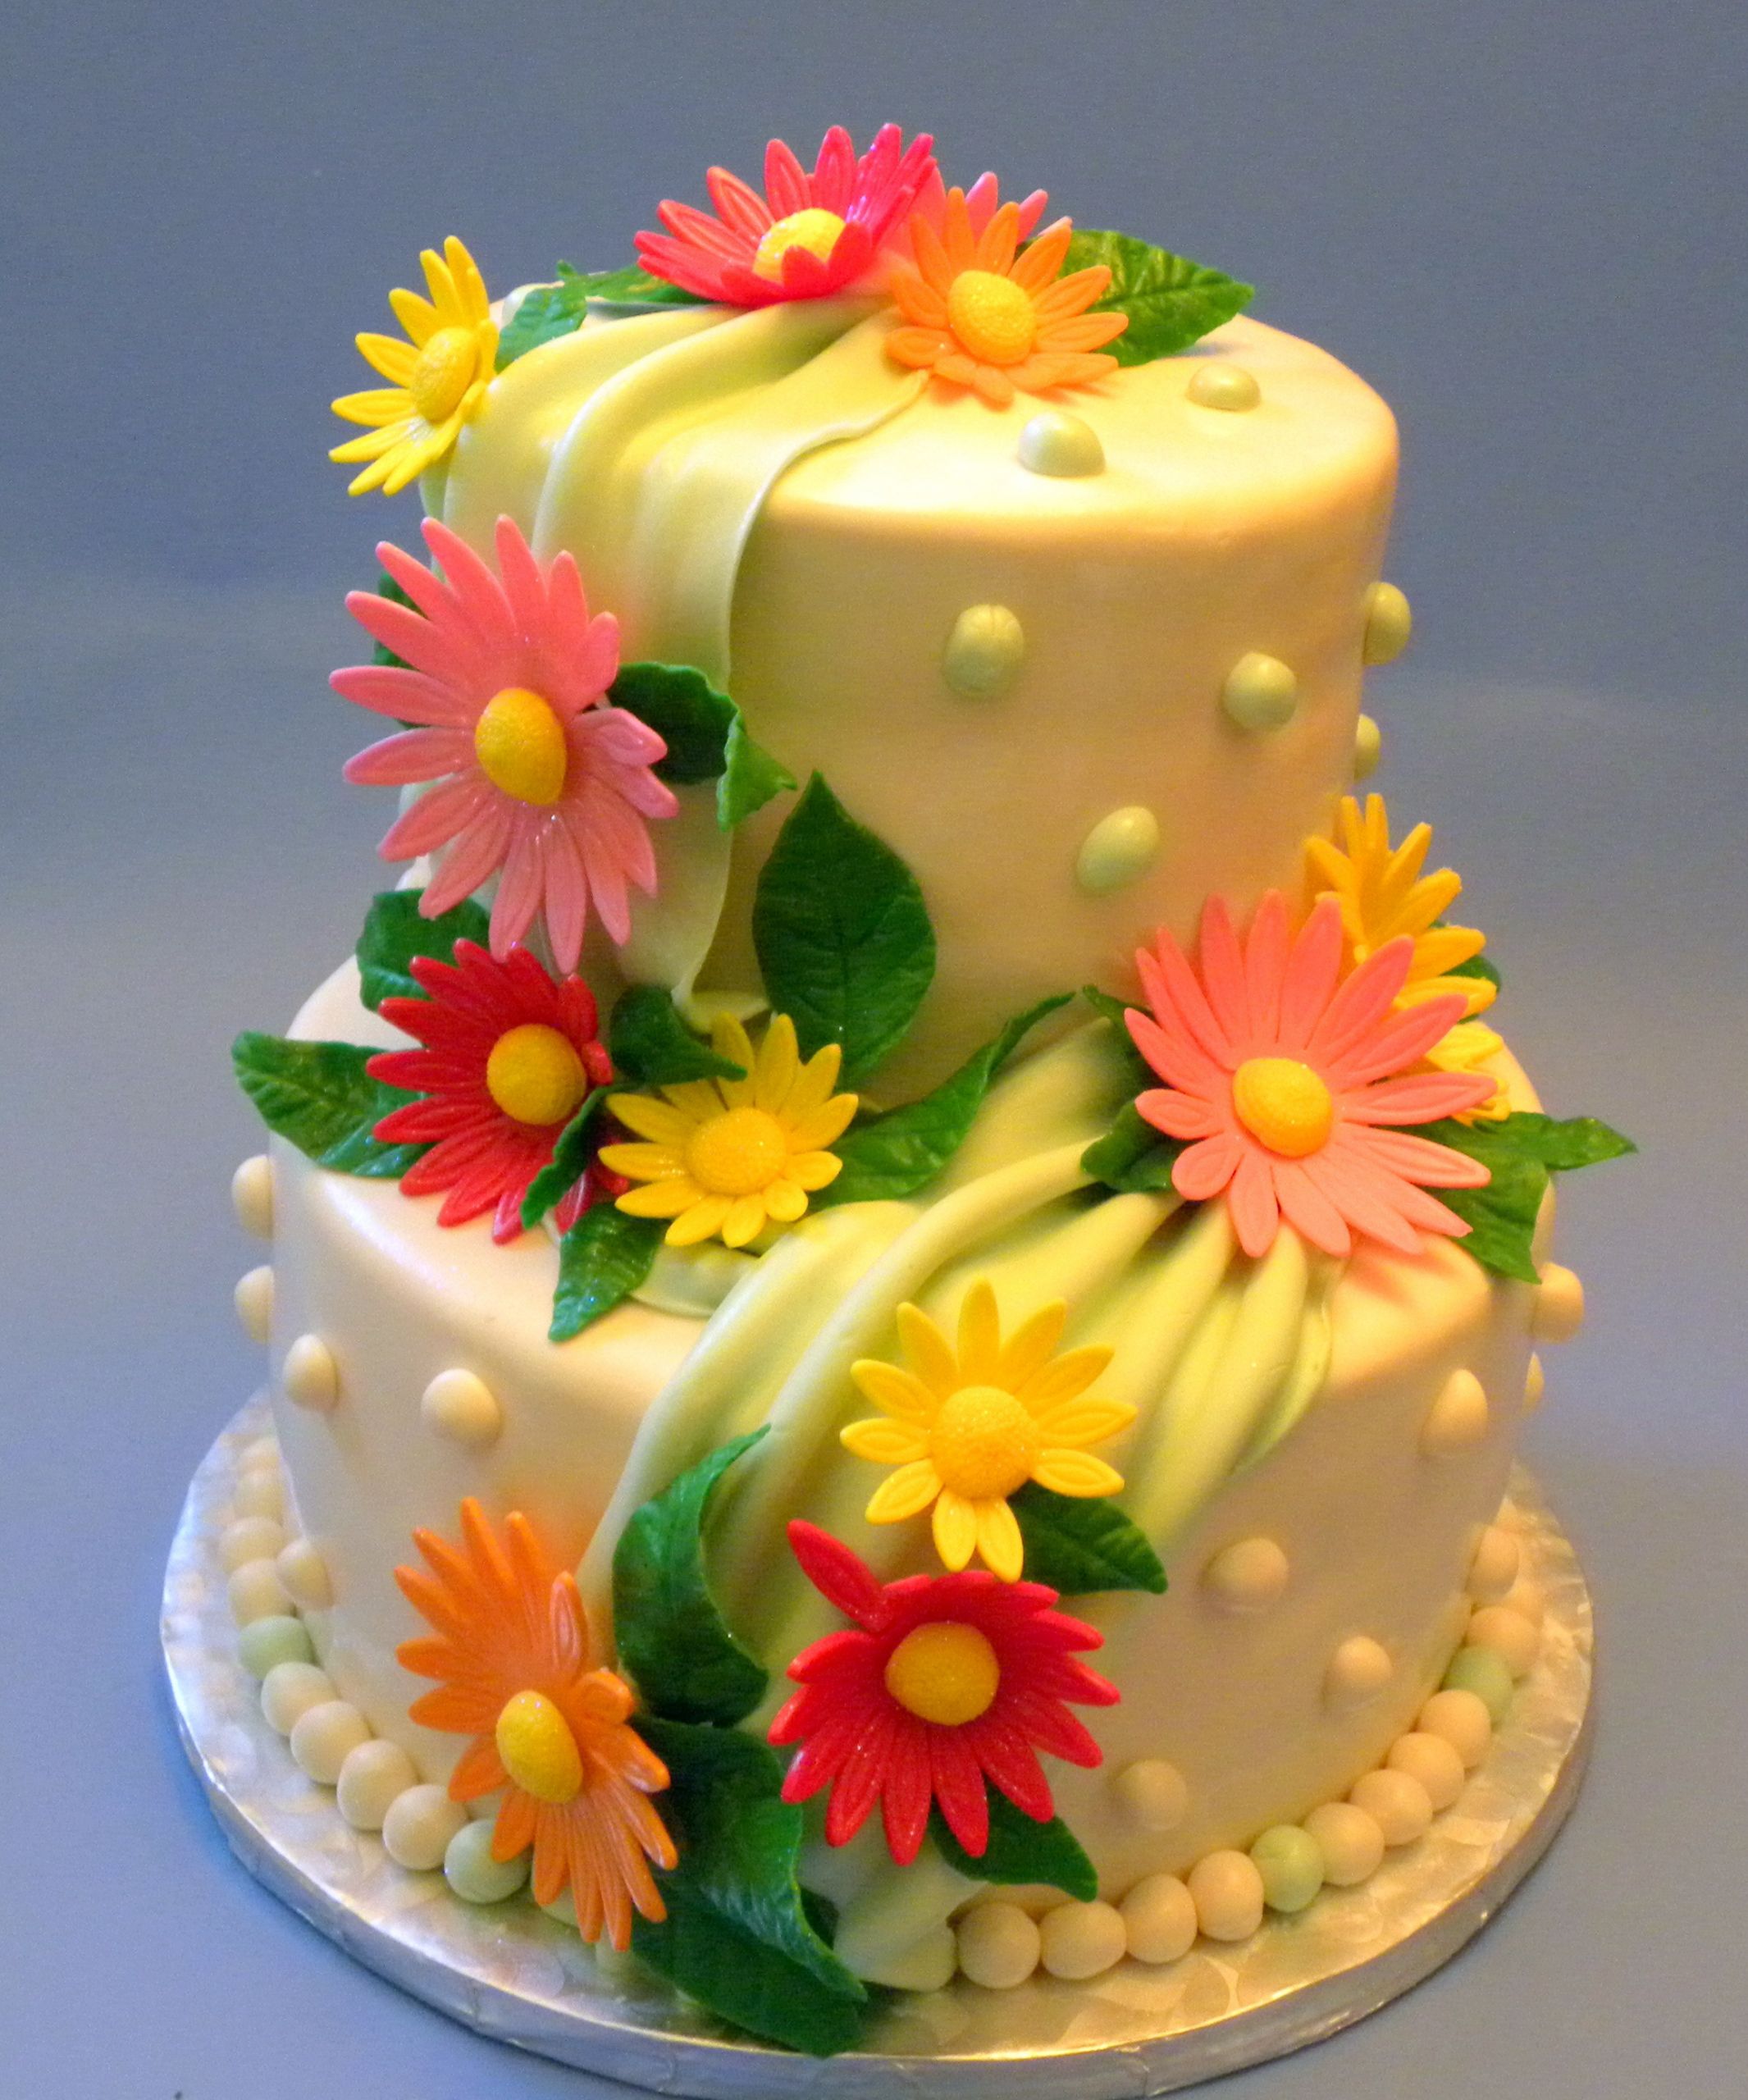 Happy Birthday Cake And Flowers
 Flower Cakes – Decoration Ideas